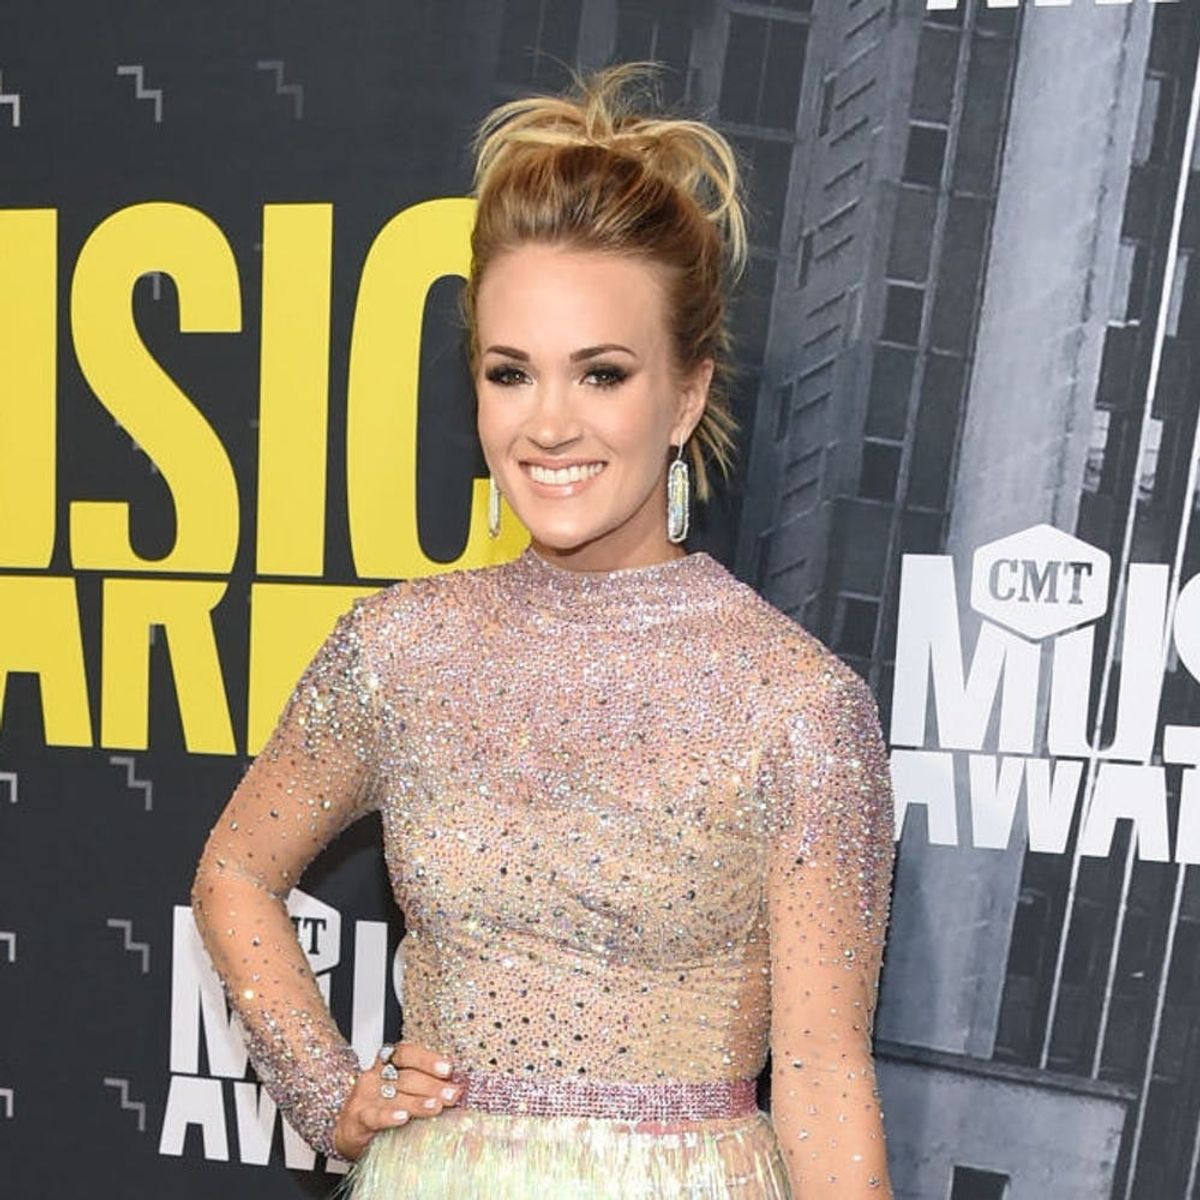 All the Nominees and Winners from the 2017 CMT Music Awards!